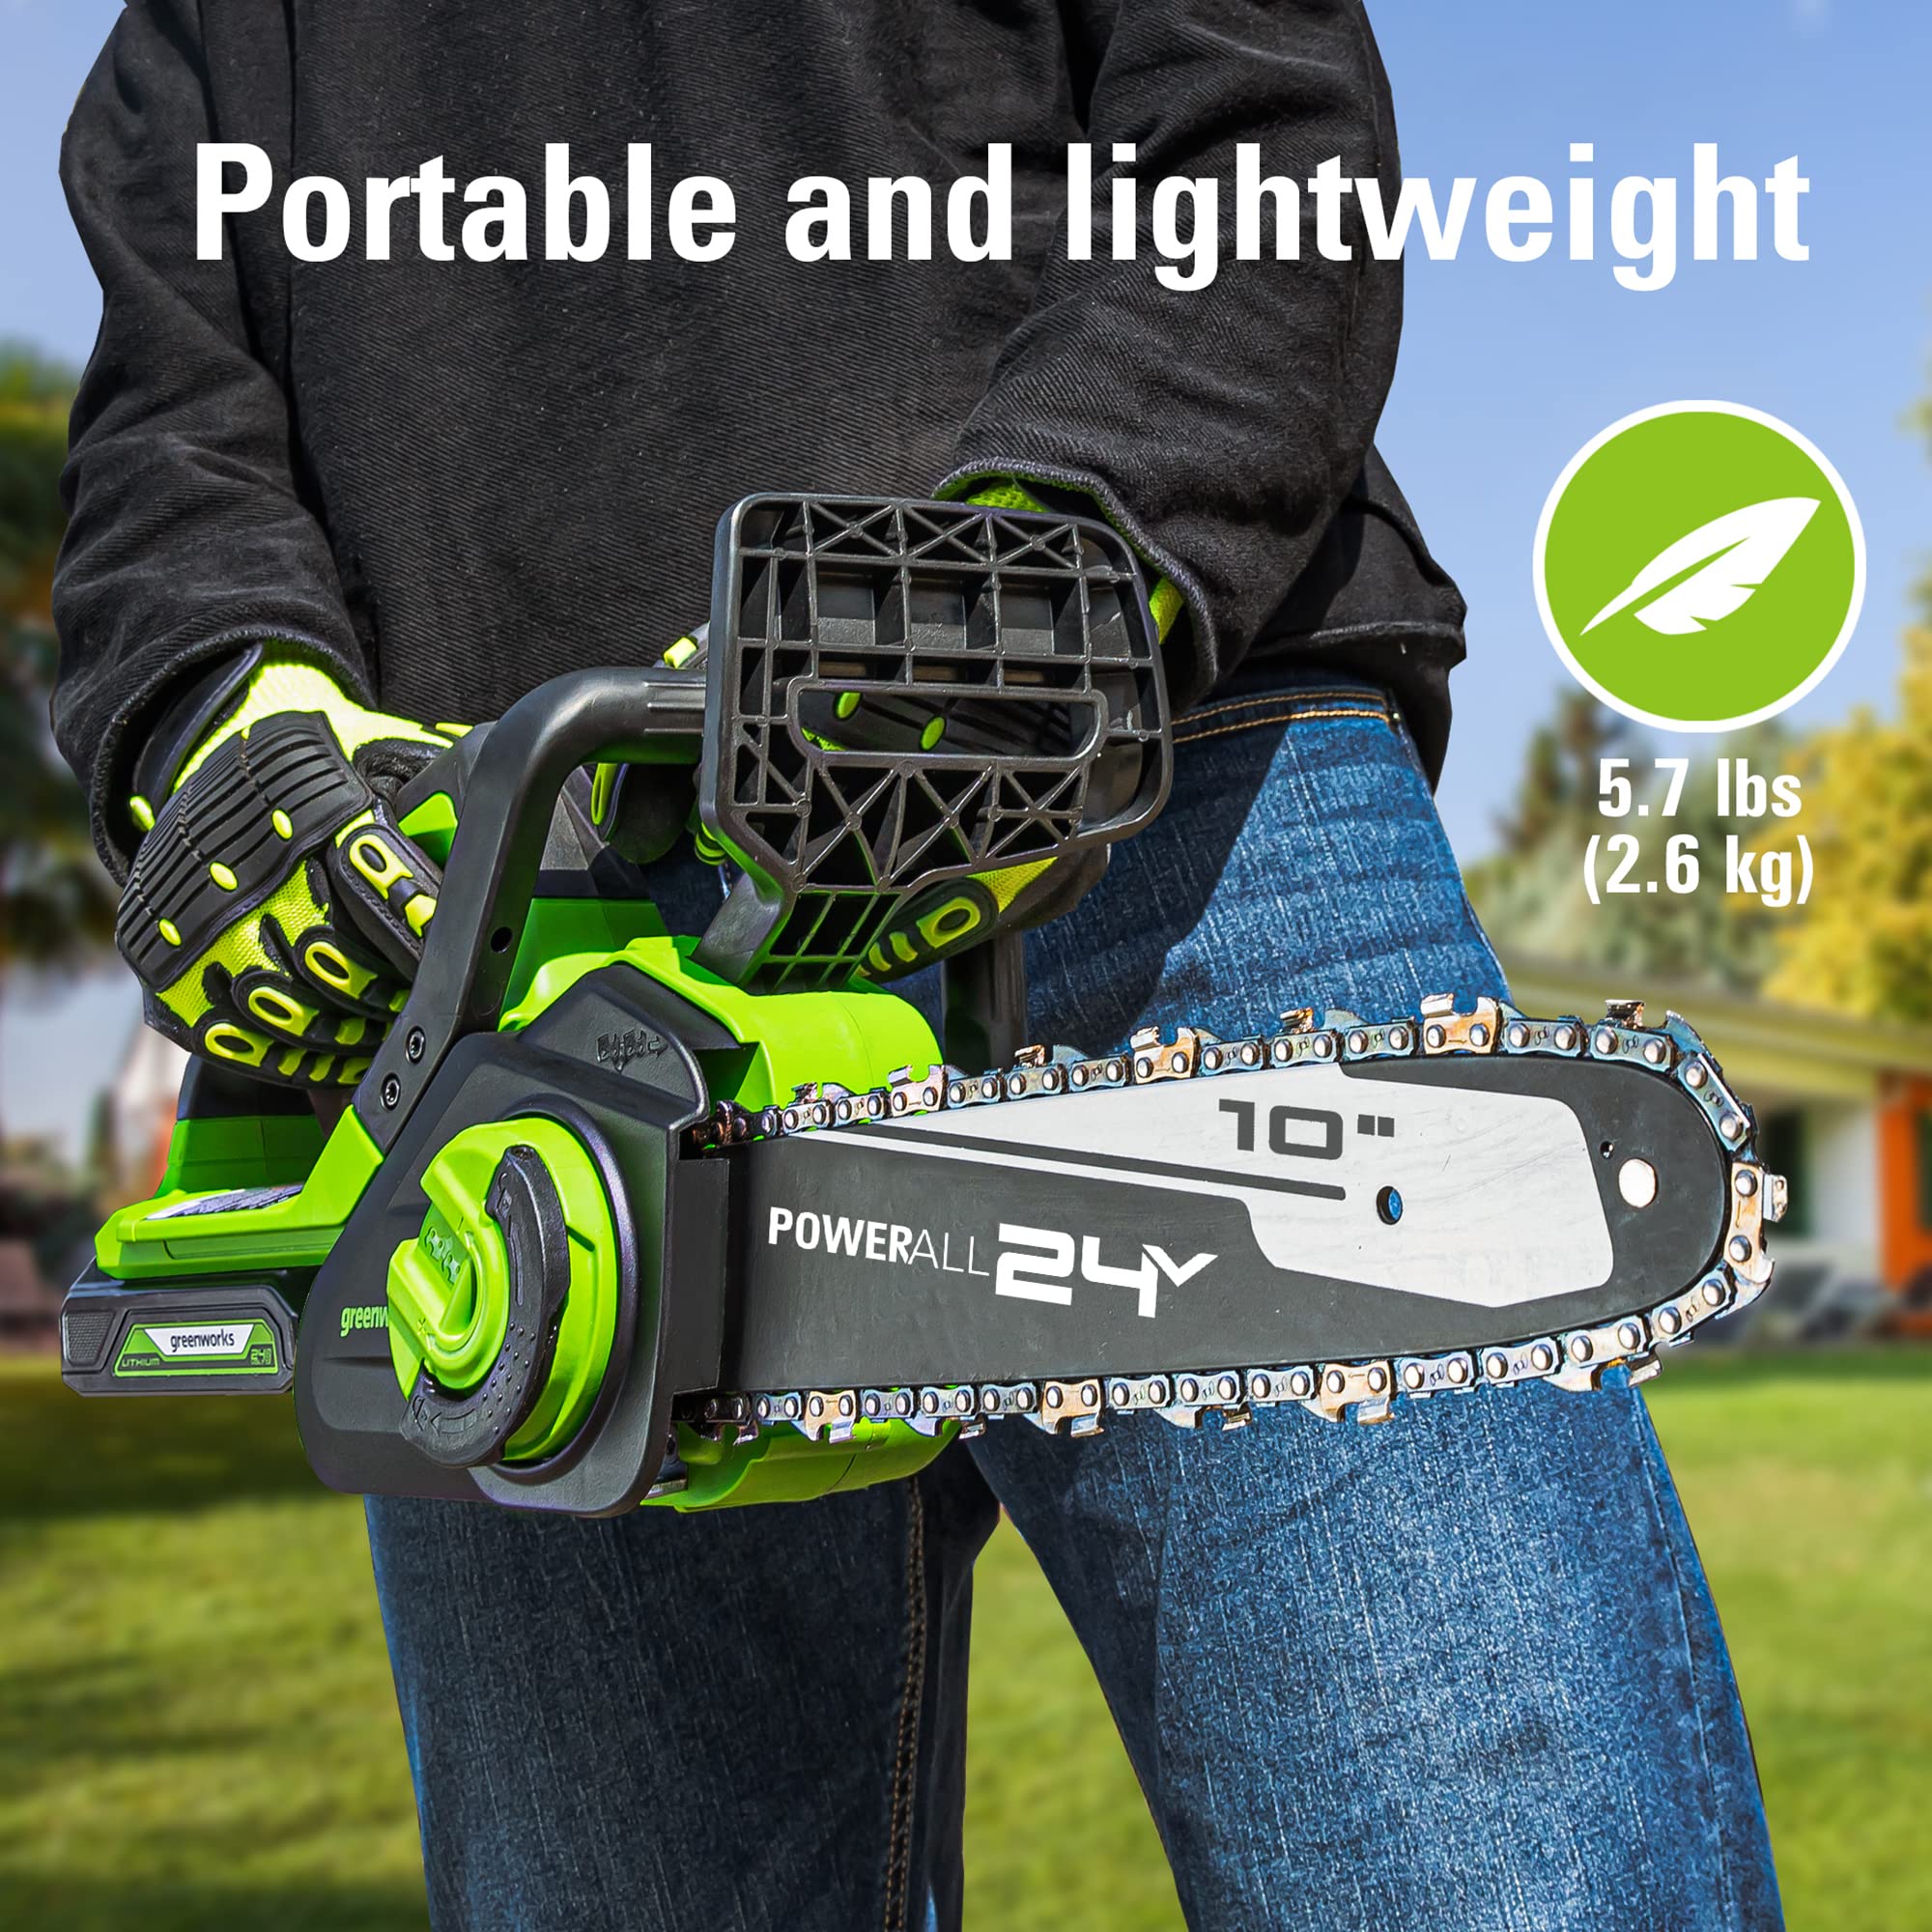 24V 10" Cordless Battery Chainsaw w/ 2.0Ah USB Battery & Charger